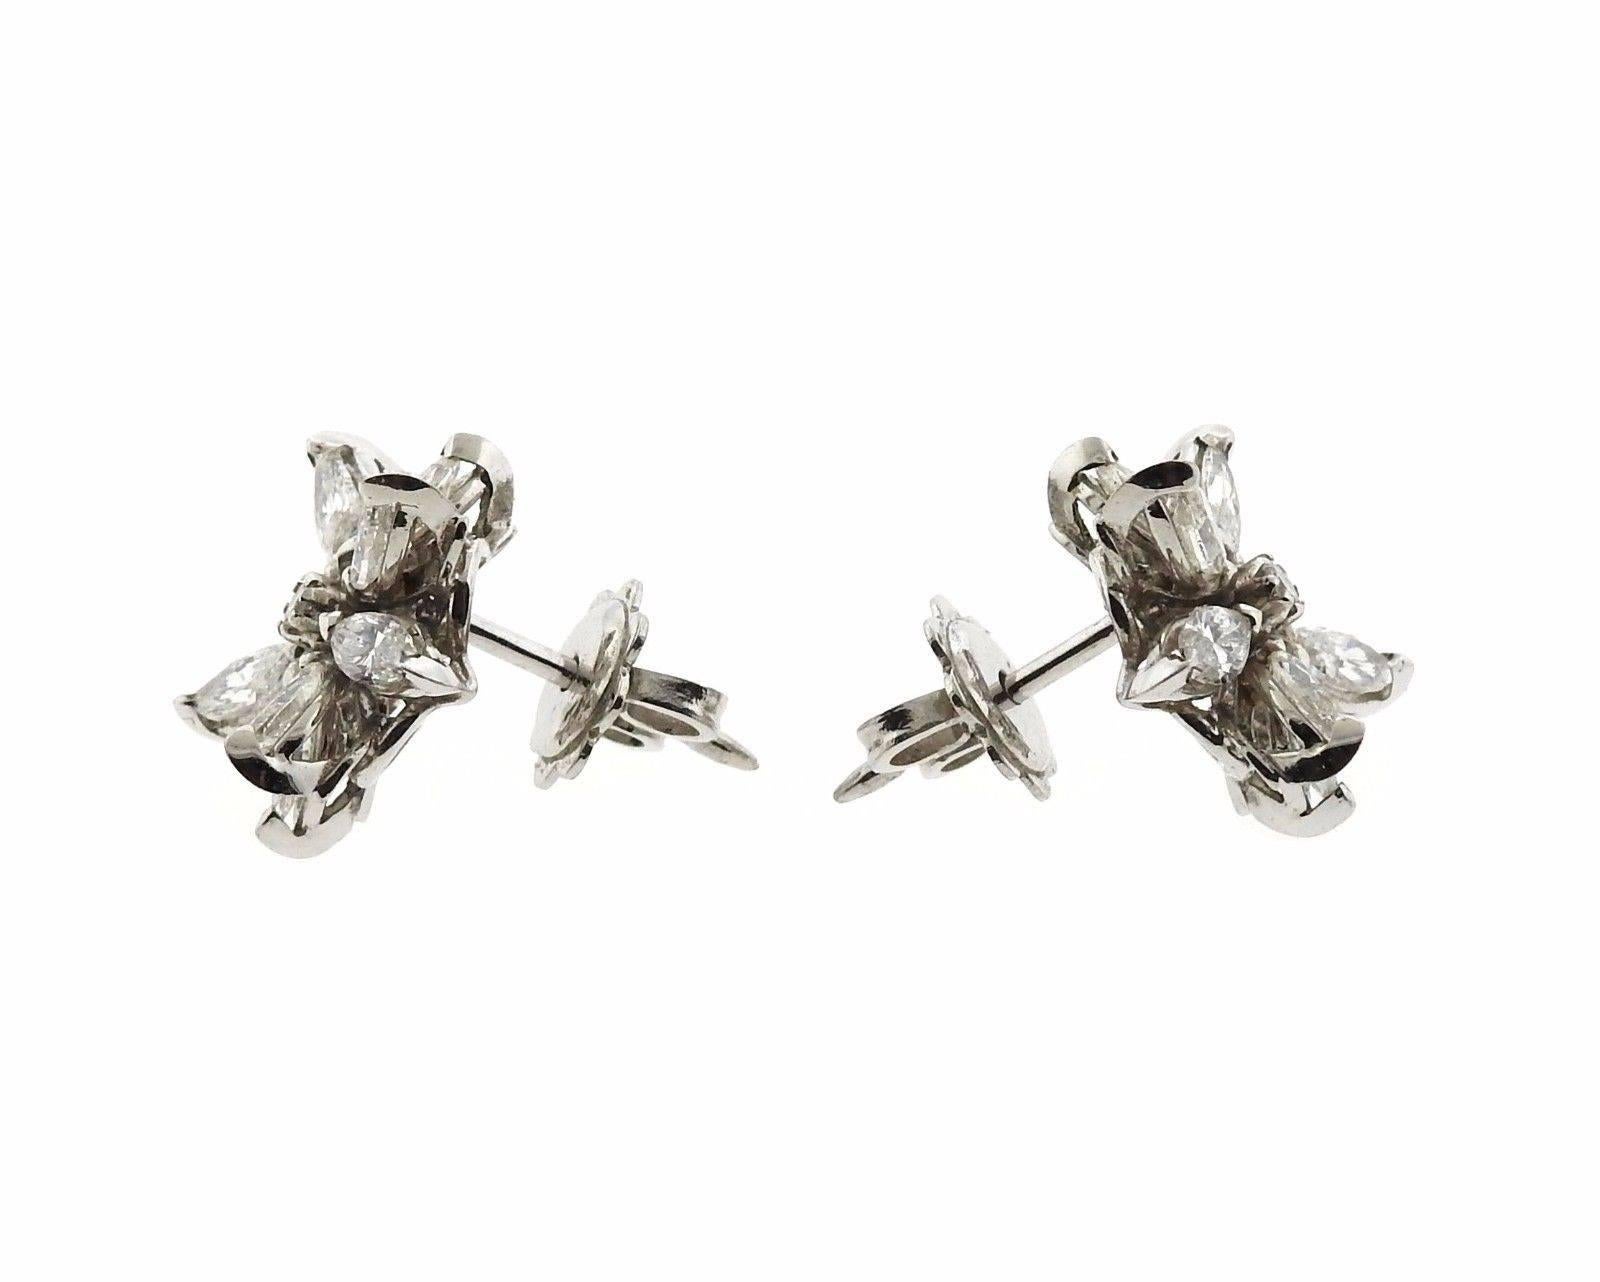 A pair of platinum earrings set with 1.96ctw of G/VS diamonds.  The earrings measure 15mm x 15mm and weigh 6.2 grams.  Marked: pt950, 3489AL, Asprey mark.